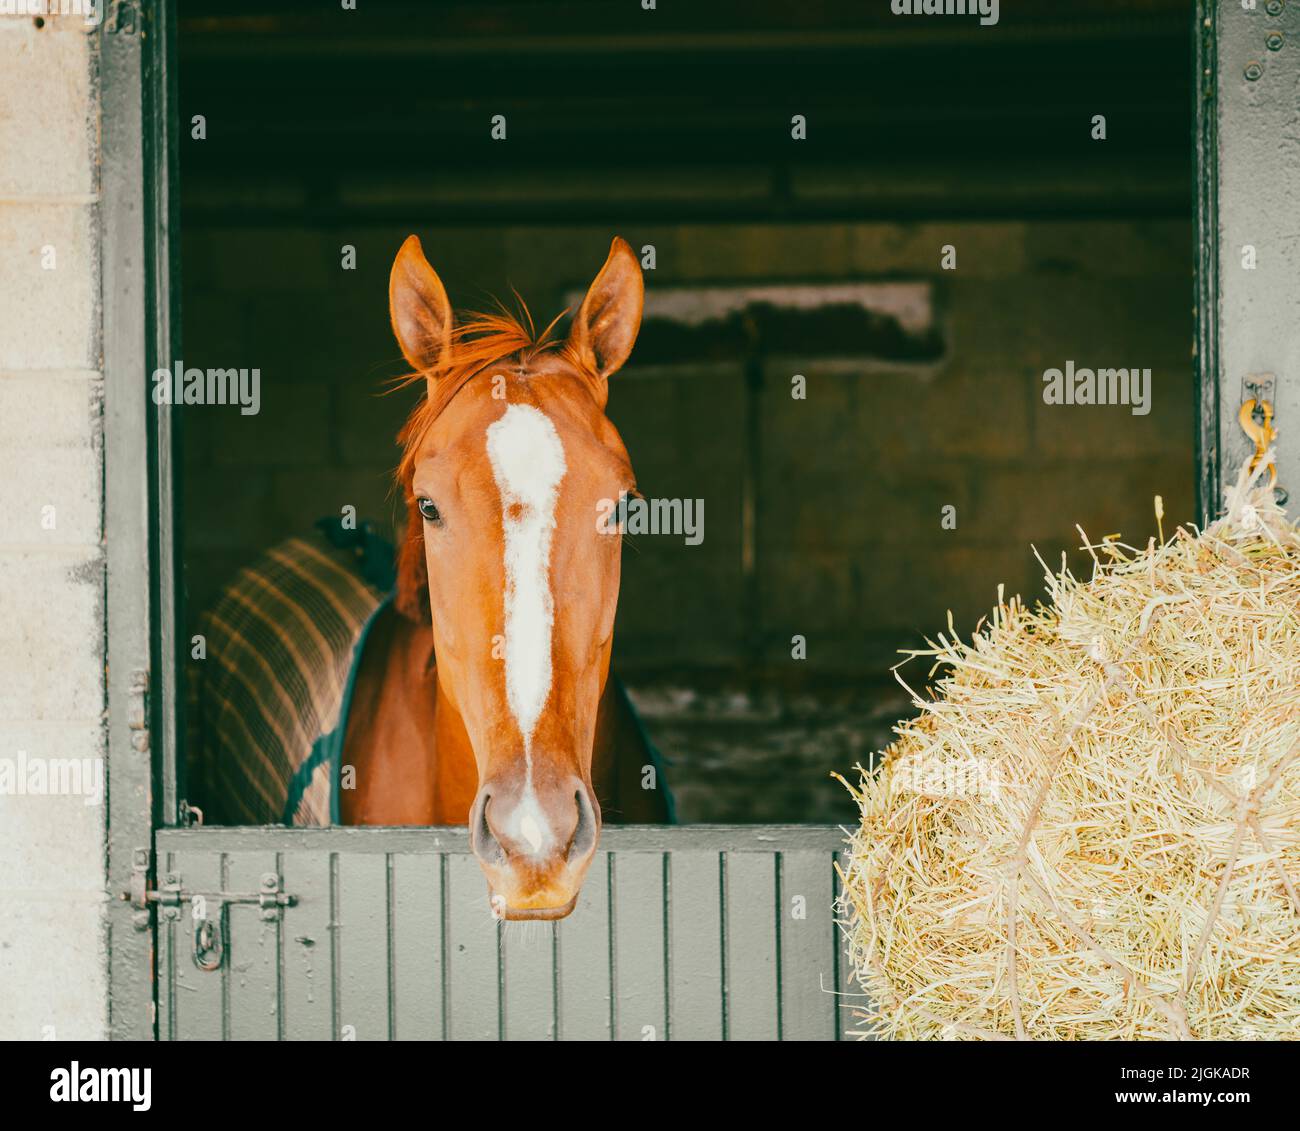 Thoroughbred race horse in a stable in Lexington, Kentucky Stock Photo